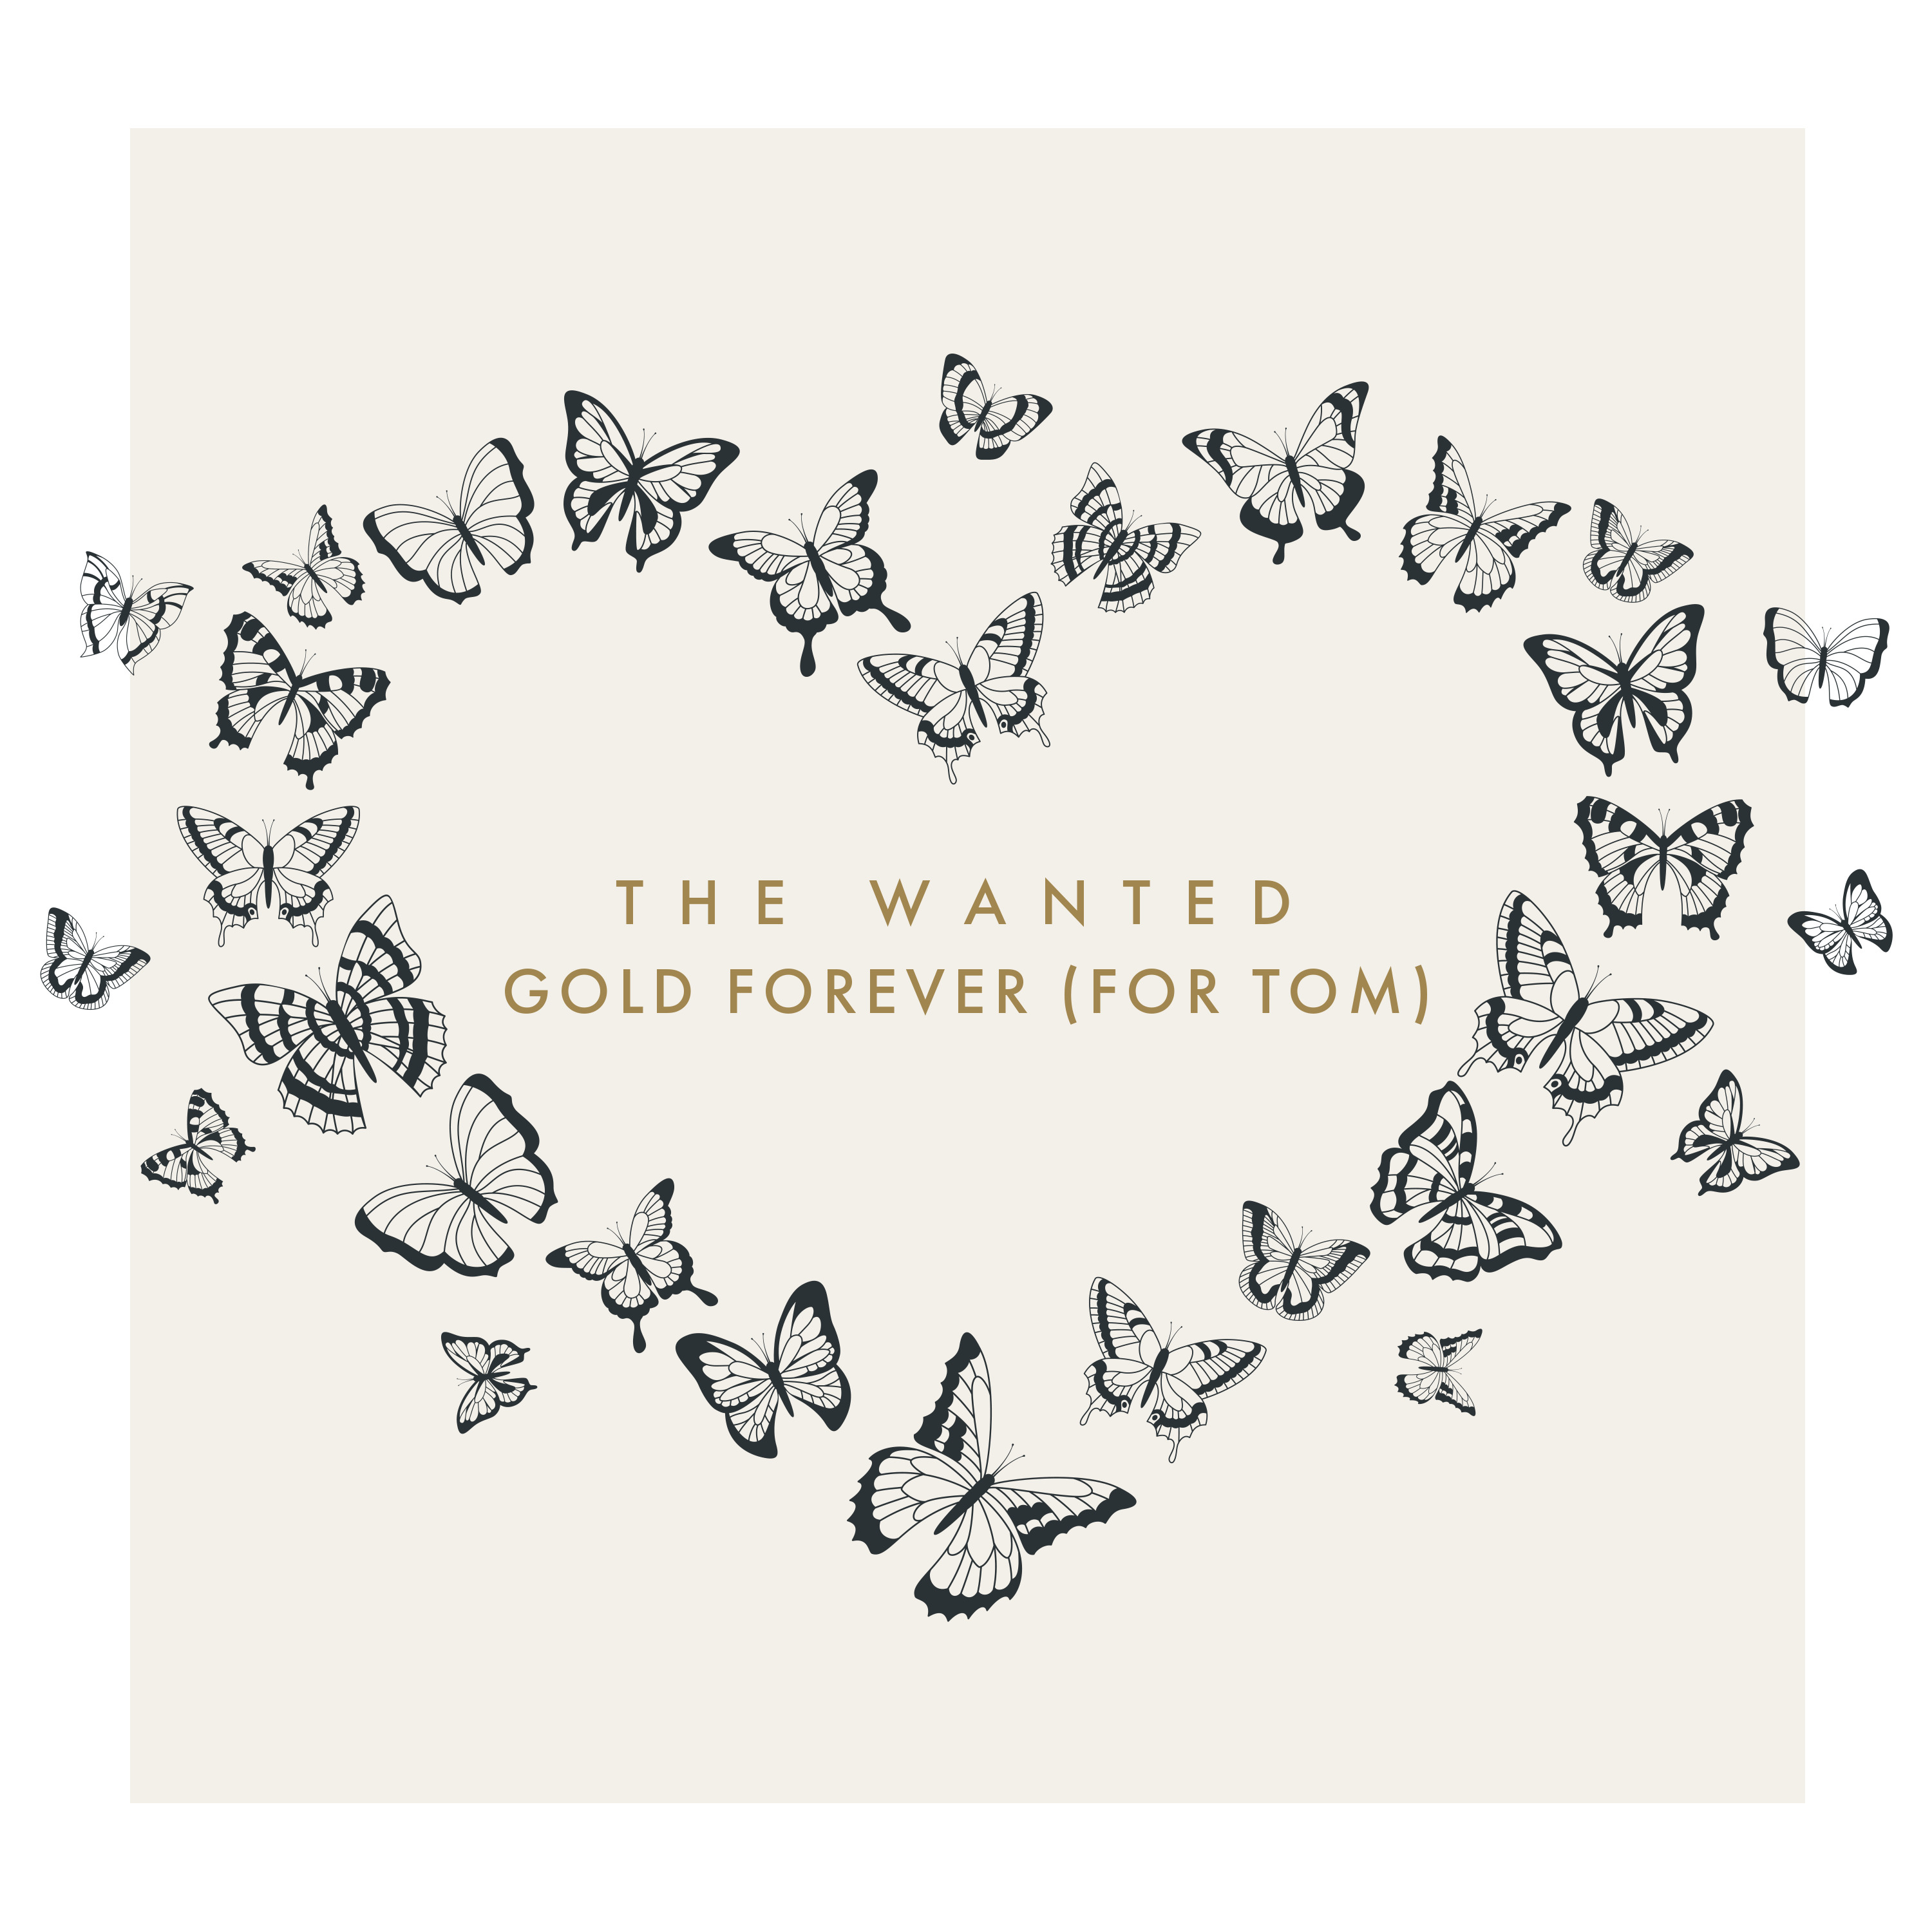 The Wanted — Gold Forever (For Tom) cover artwork